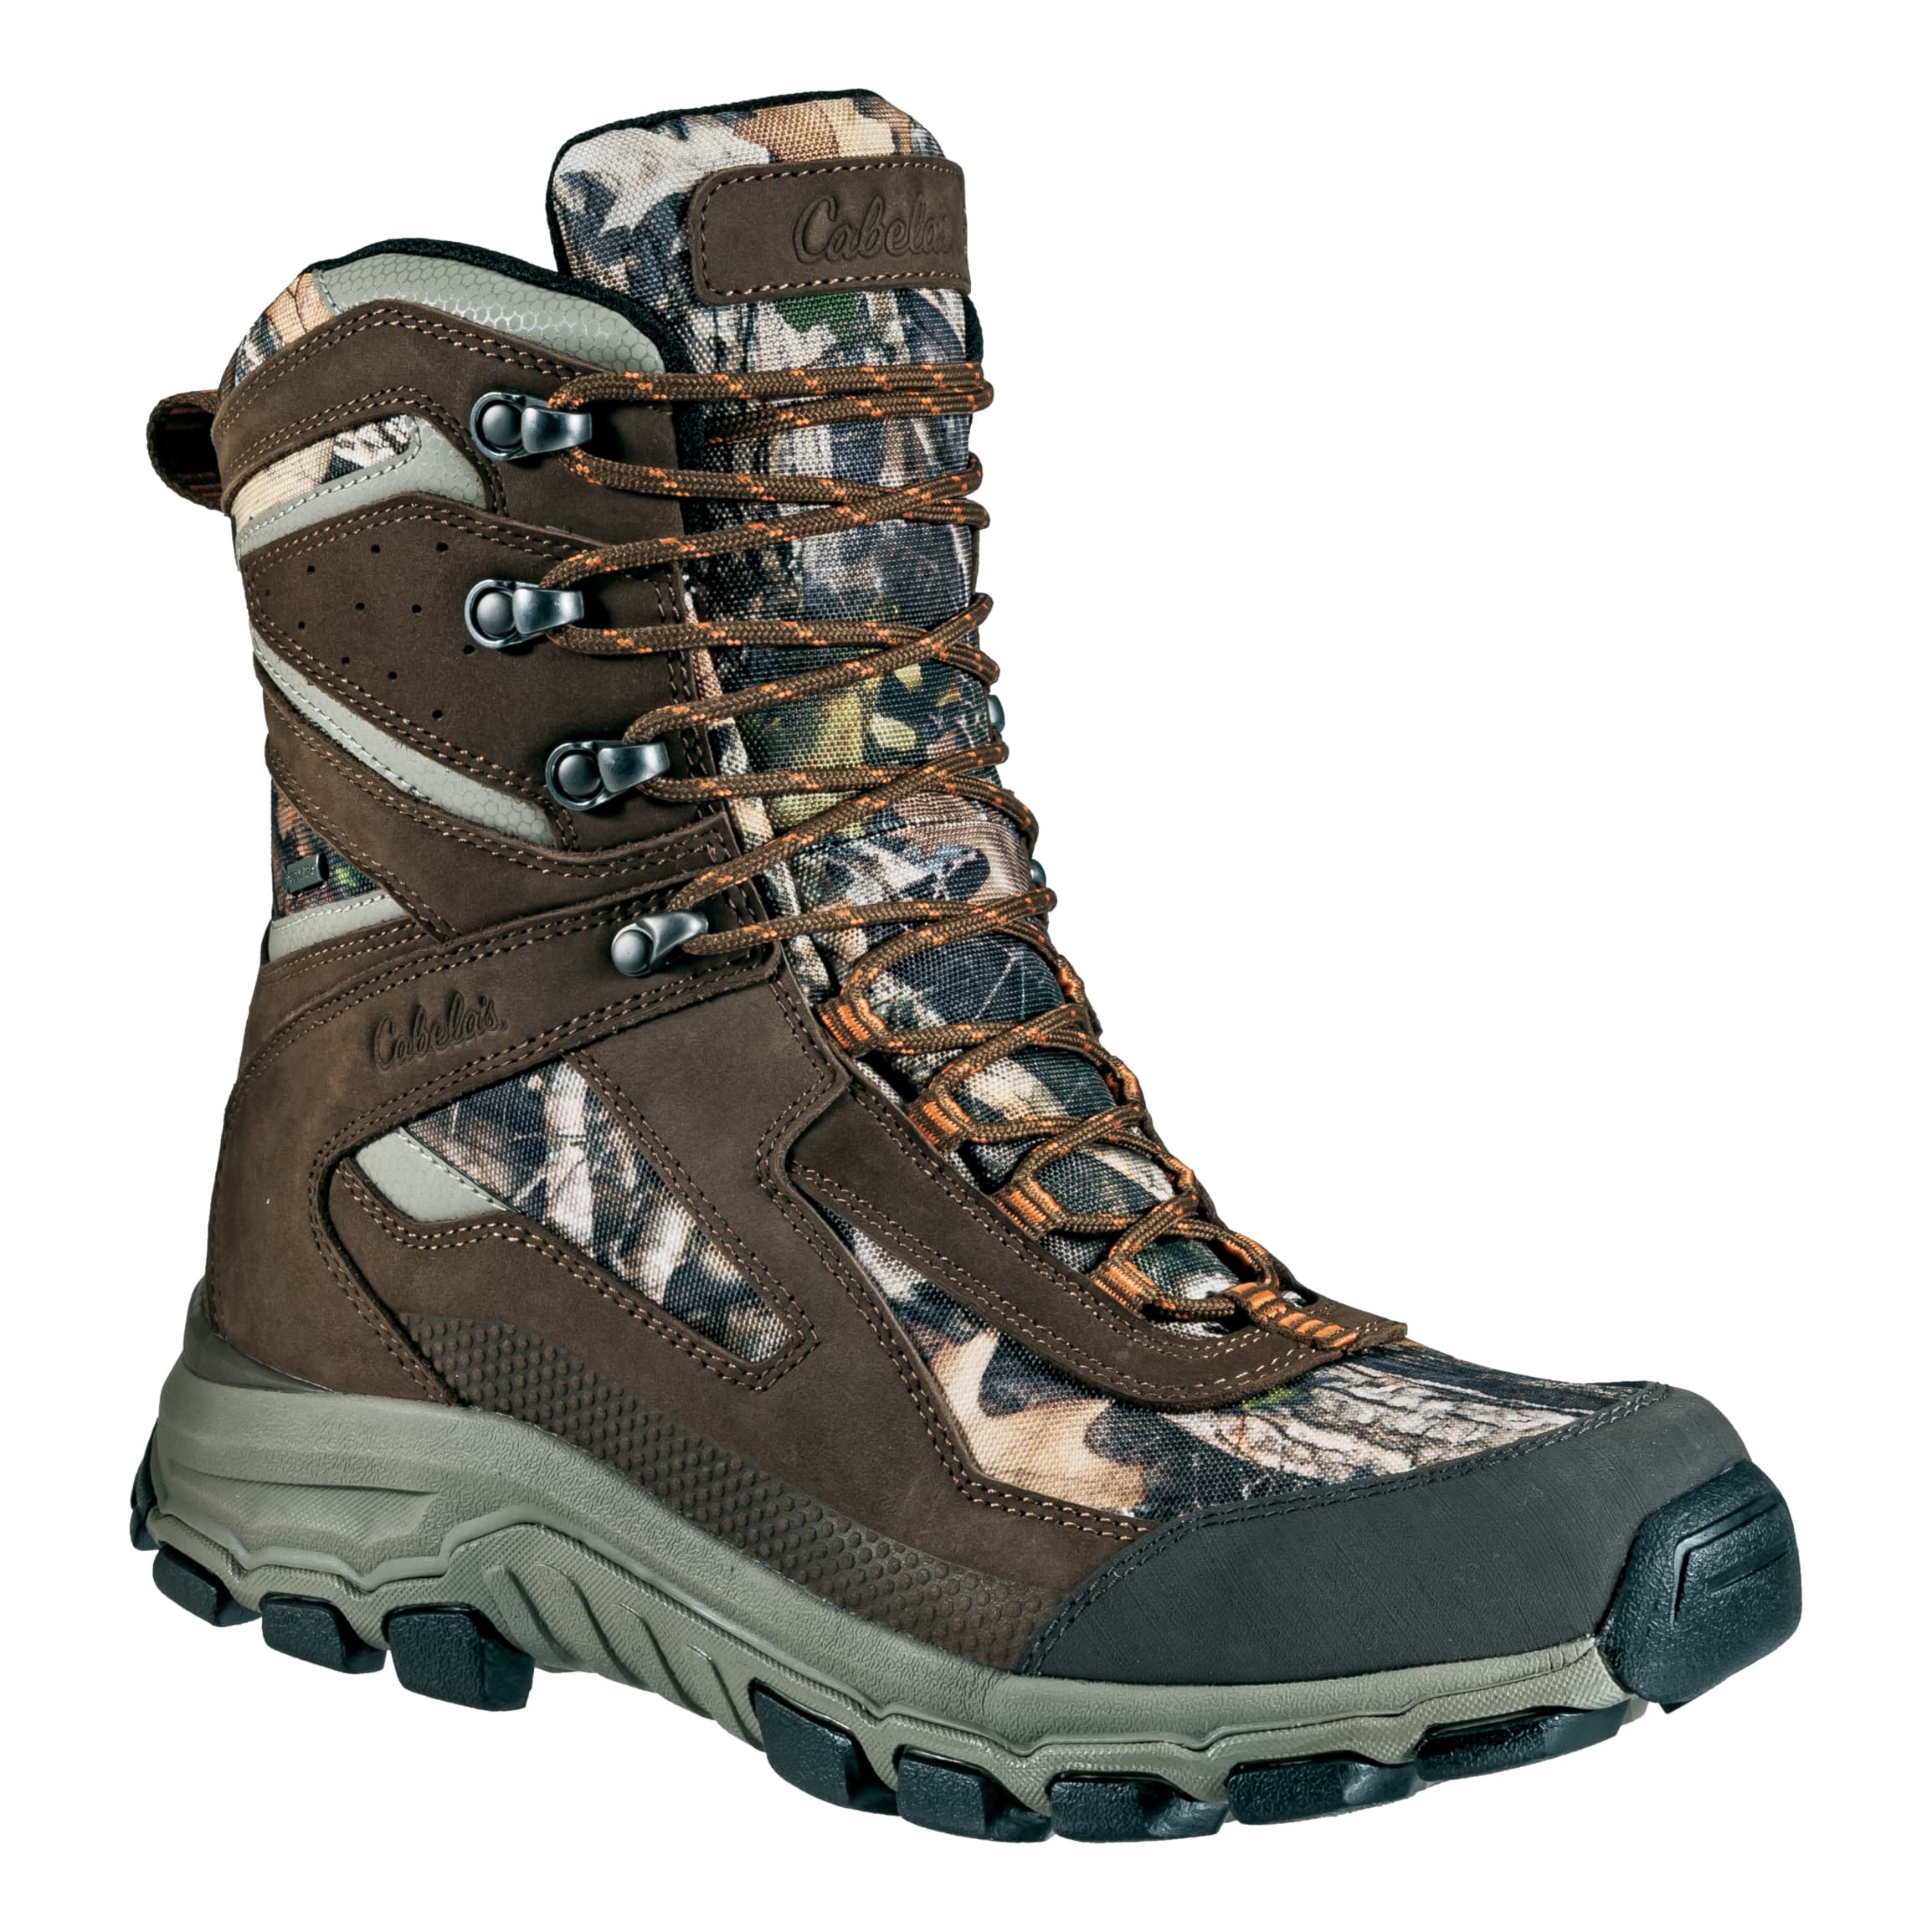 Cabela’s Men’s 8" Uninsulated Axis Hunting Boots with GORE-TEX®